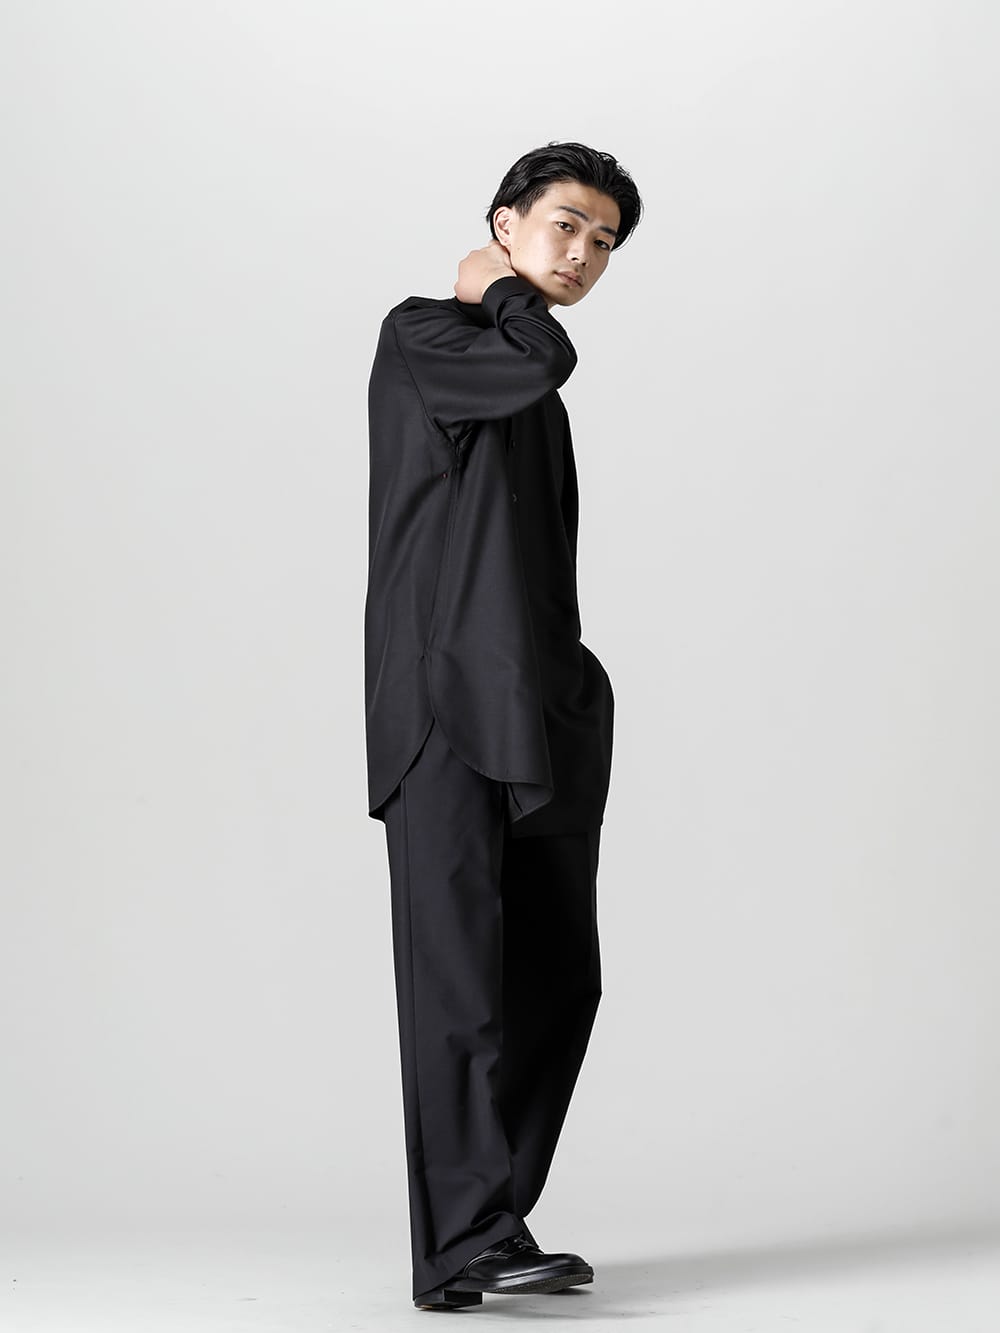 IRENISA Middle Length Shirt All Black Style!! - FASCINATE BLOG